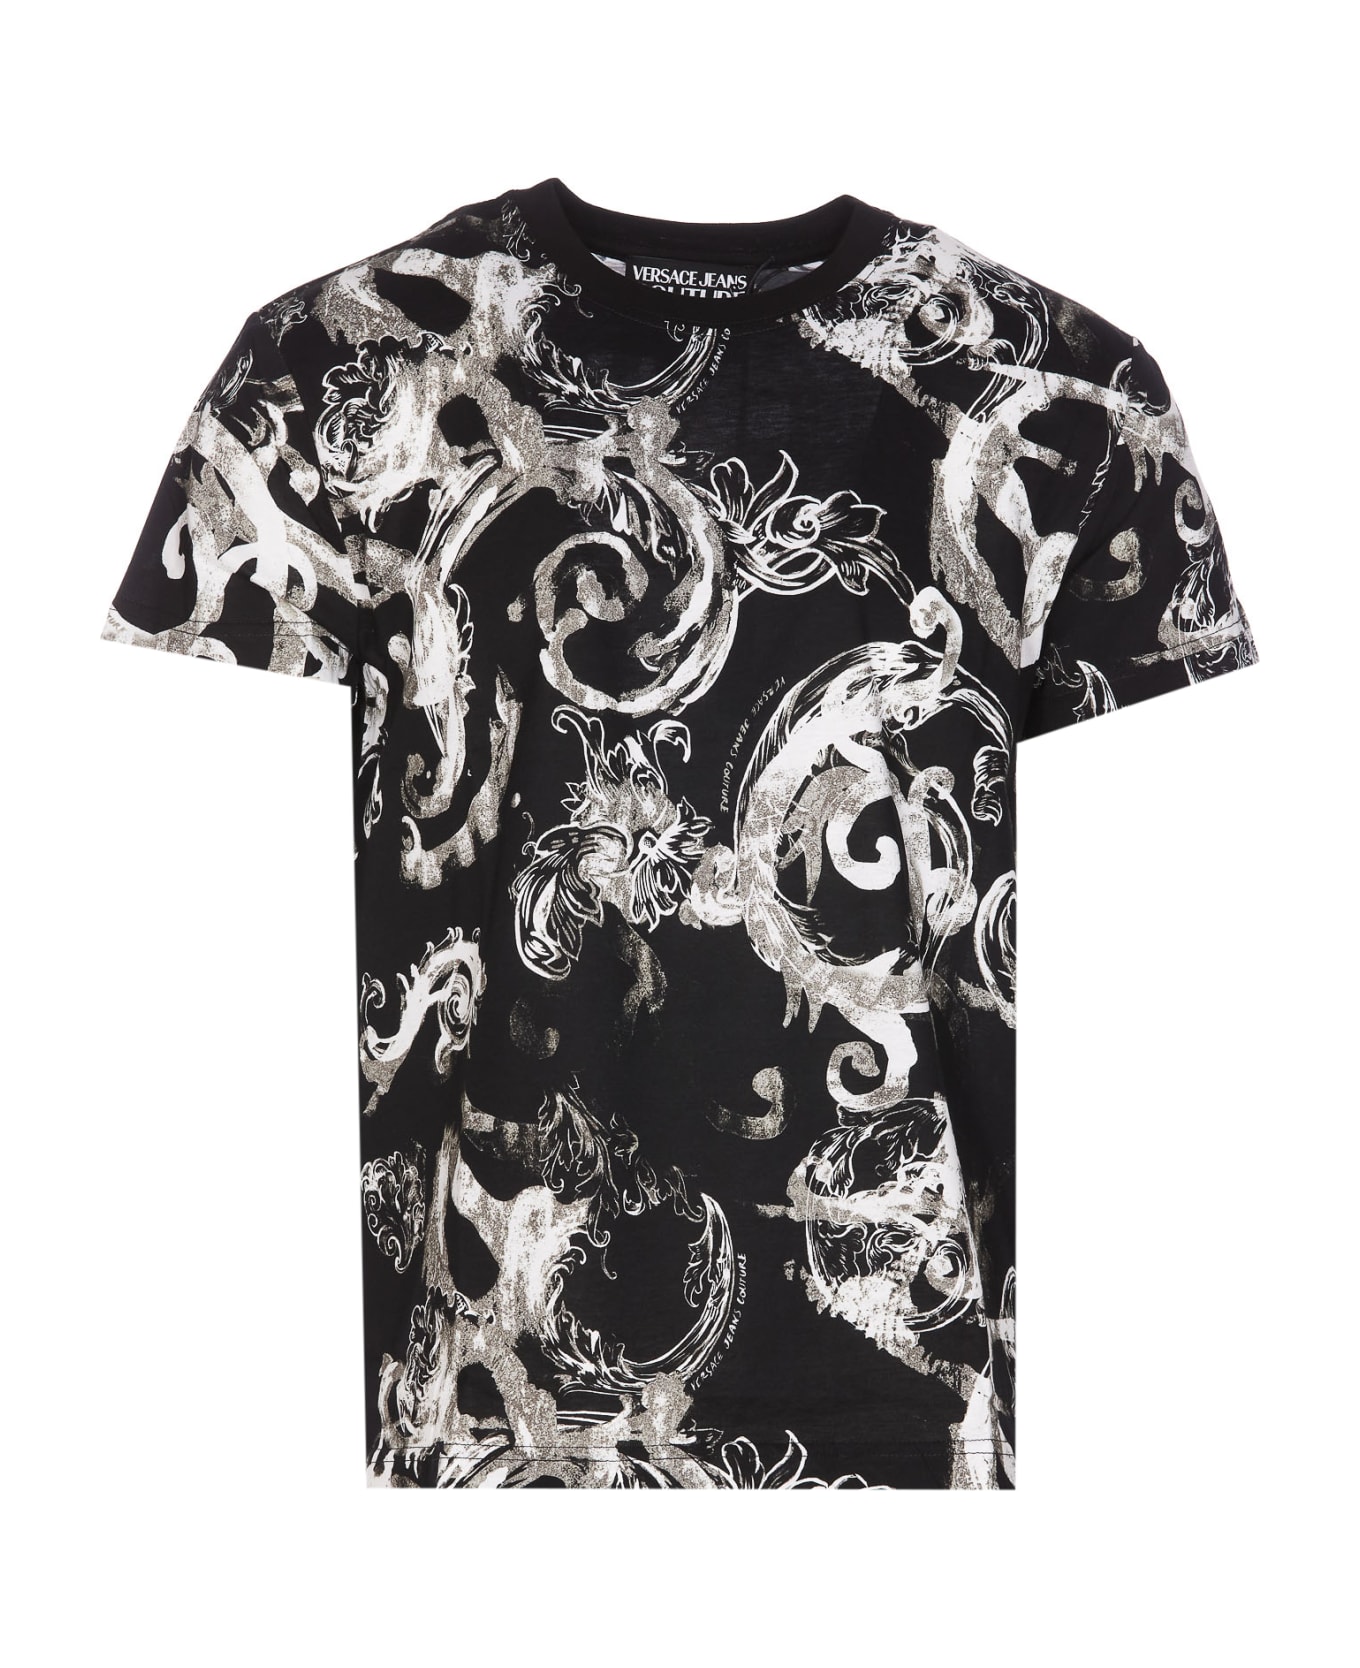 Versace Jeans Couture Watercolour Couture T-shirt - BLACK/WHITE シャツ